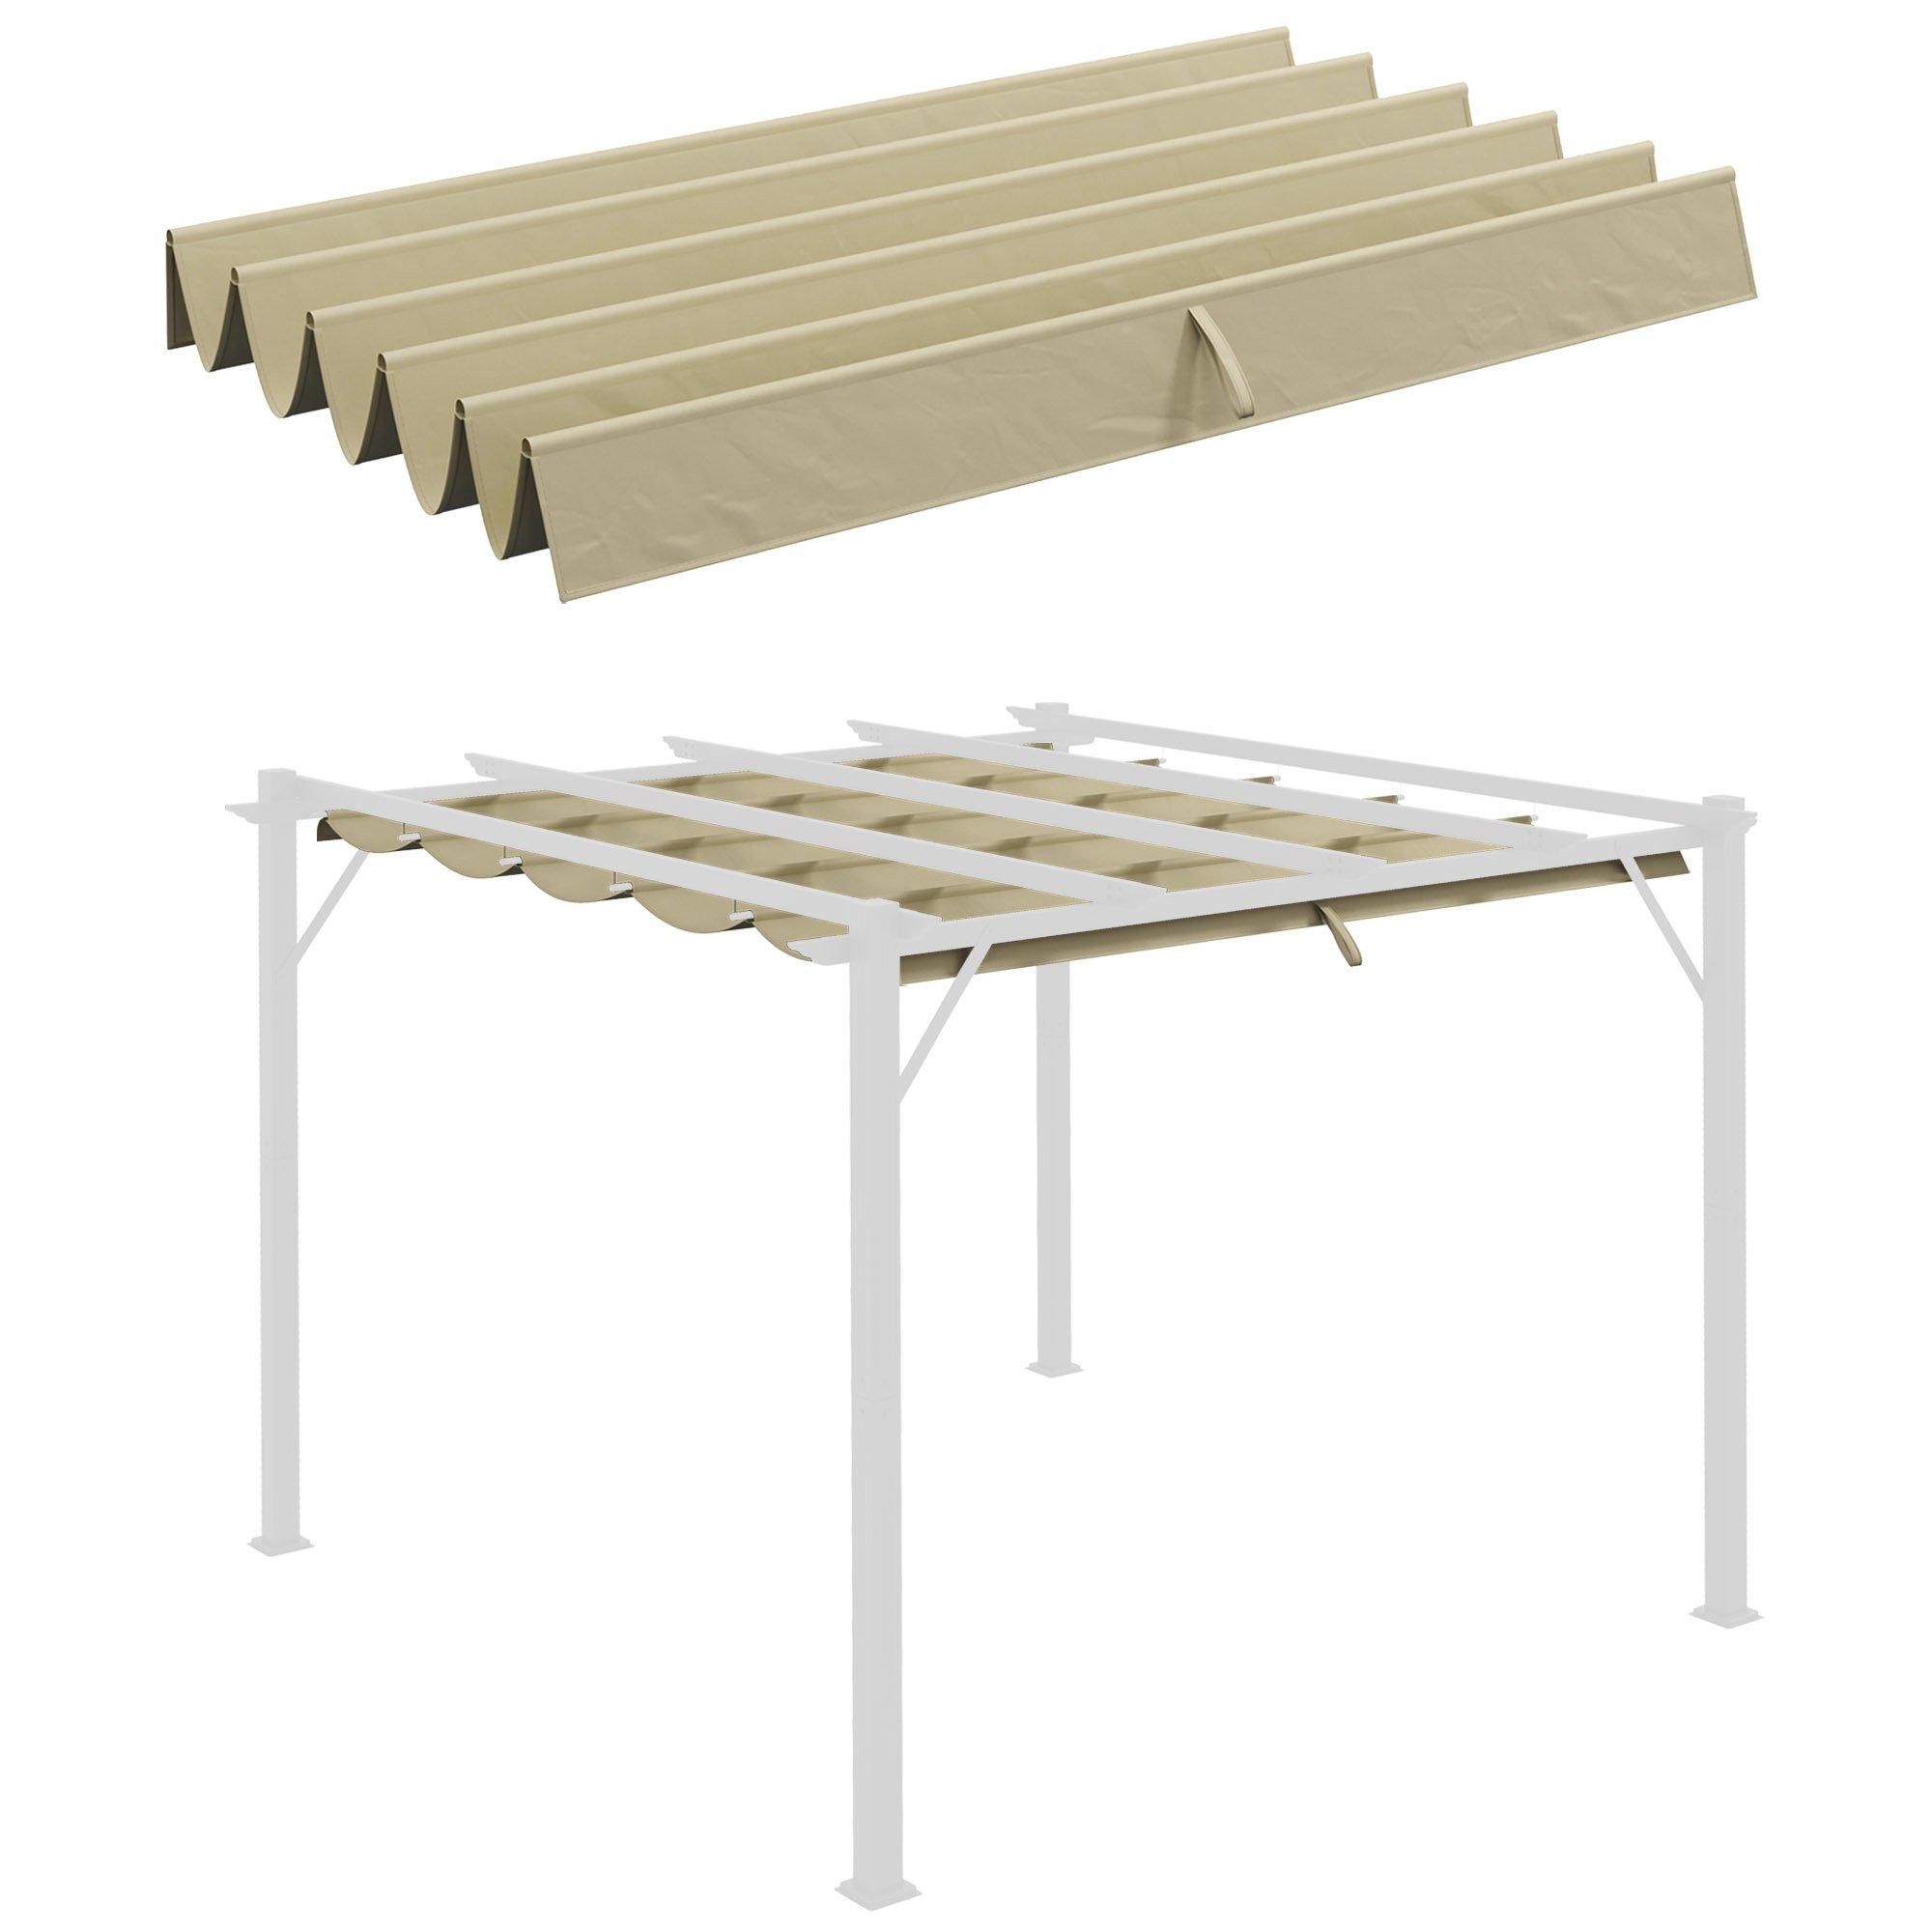 Pergola Shade Cover for 3 x 3m Pergola, Replacement Canopy Fabric Only